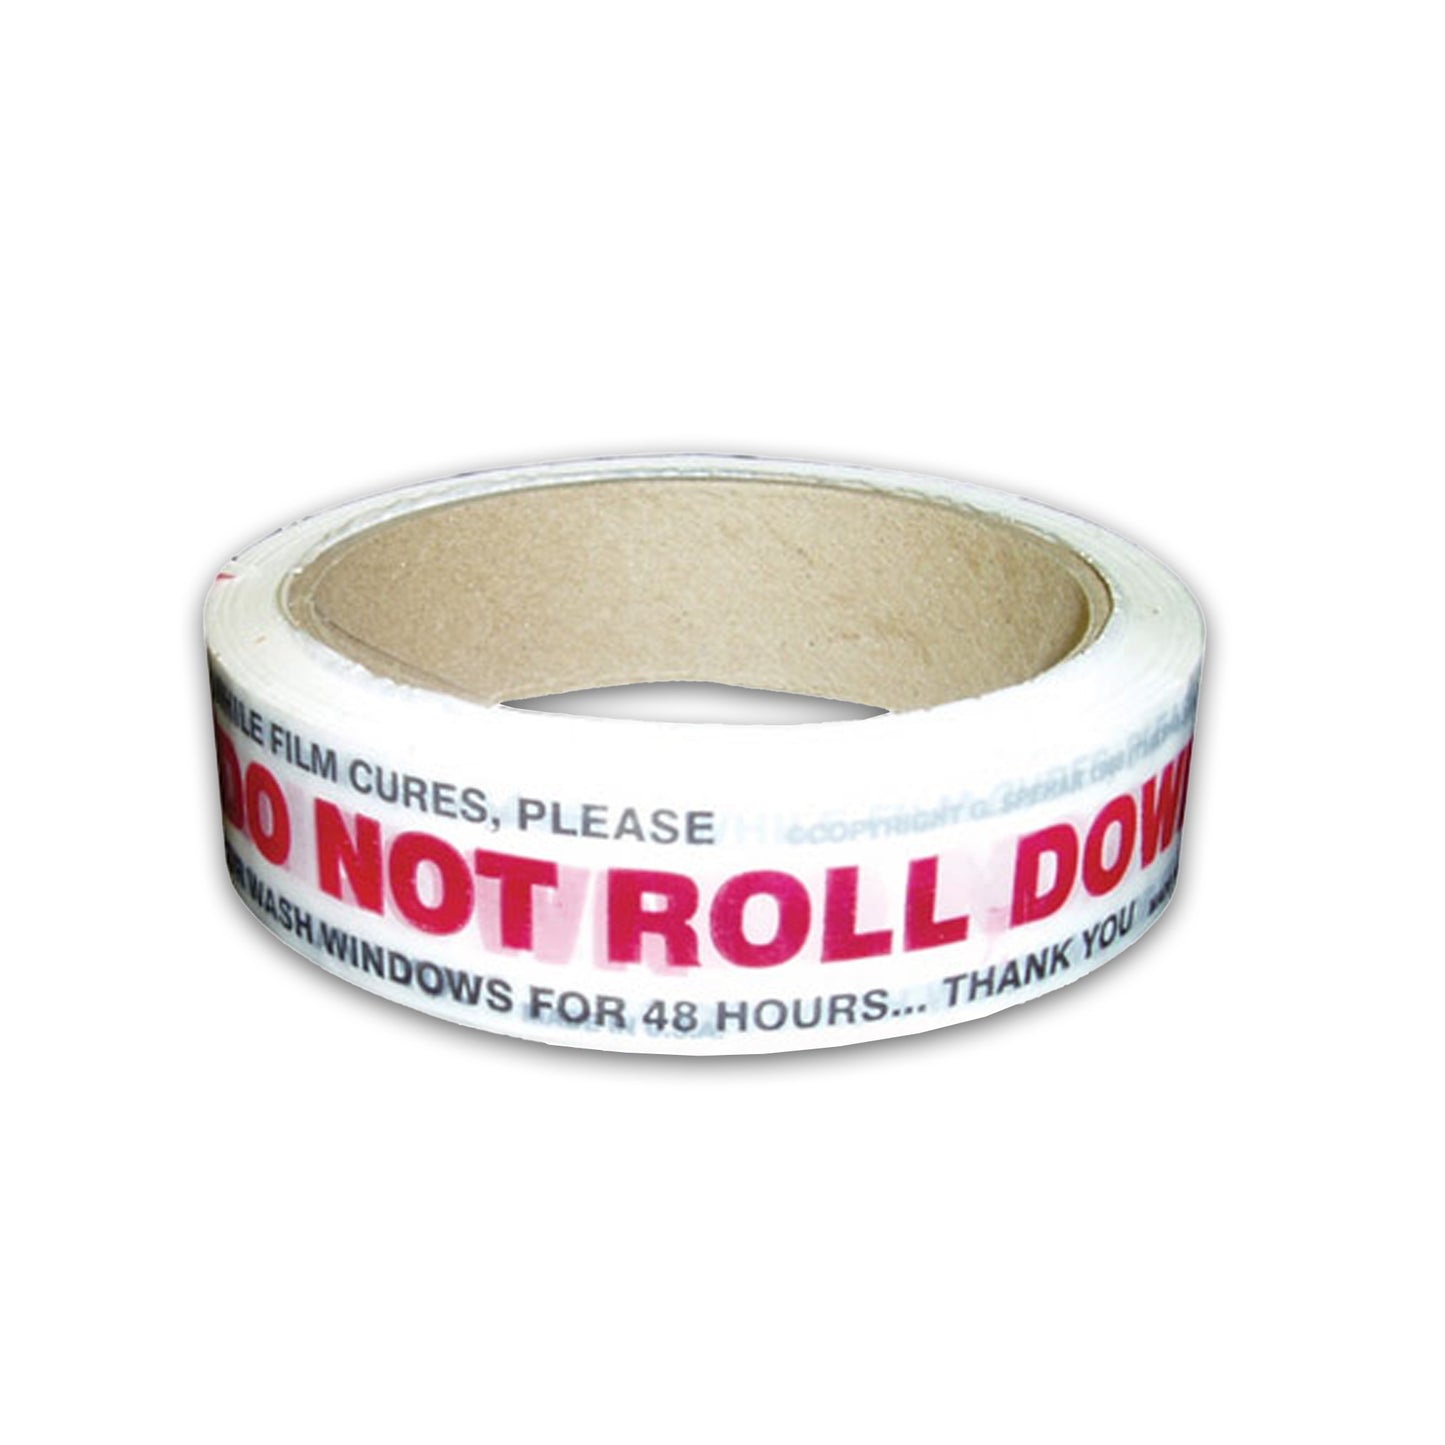 Do Not Roll Down Tape